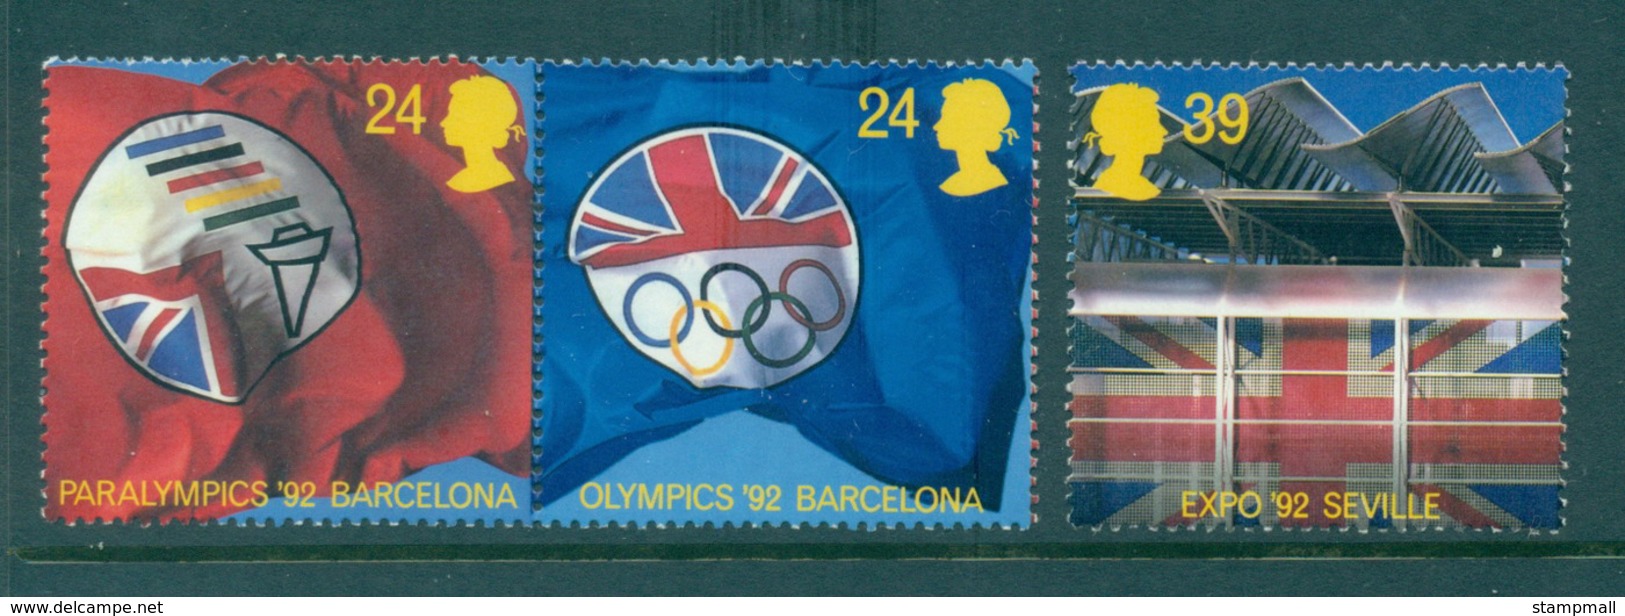 GB 1992 Events MUH Lot33002 - Unclassified